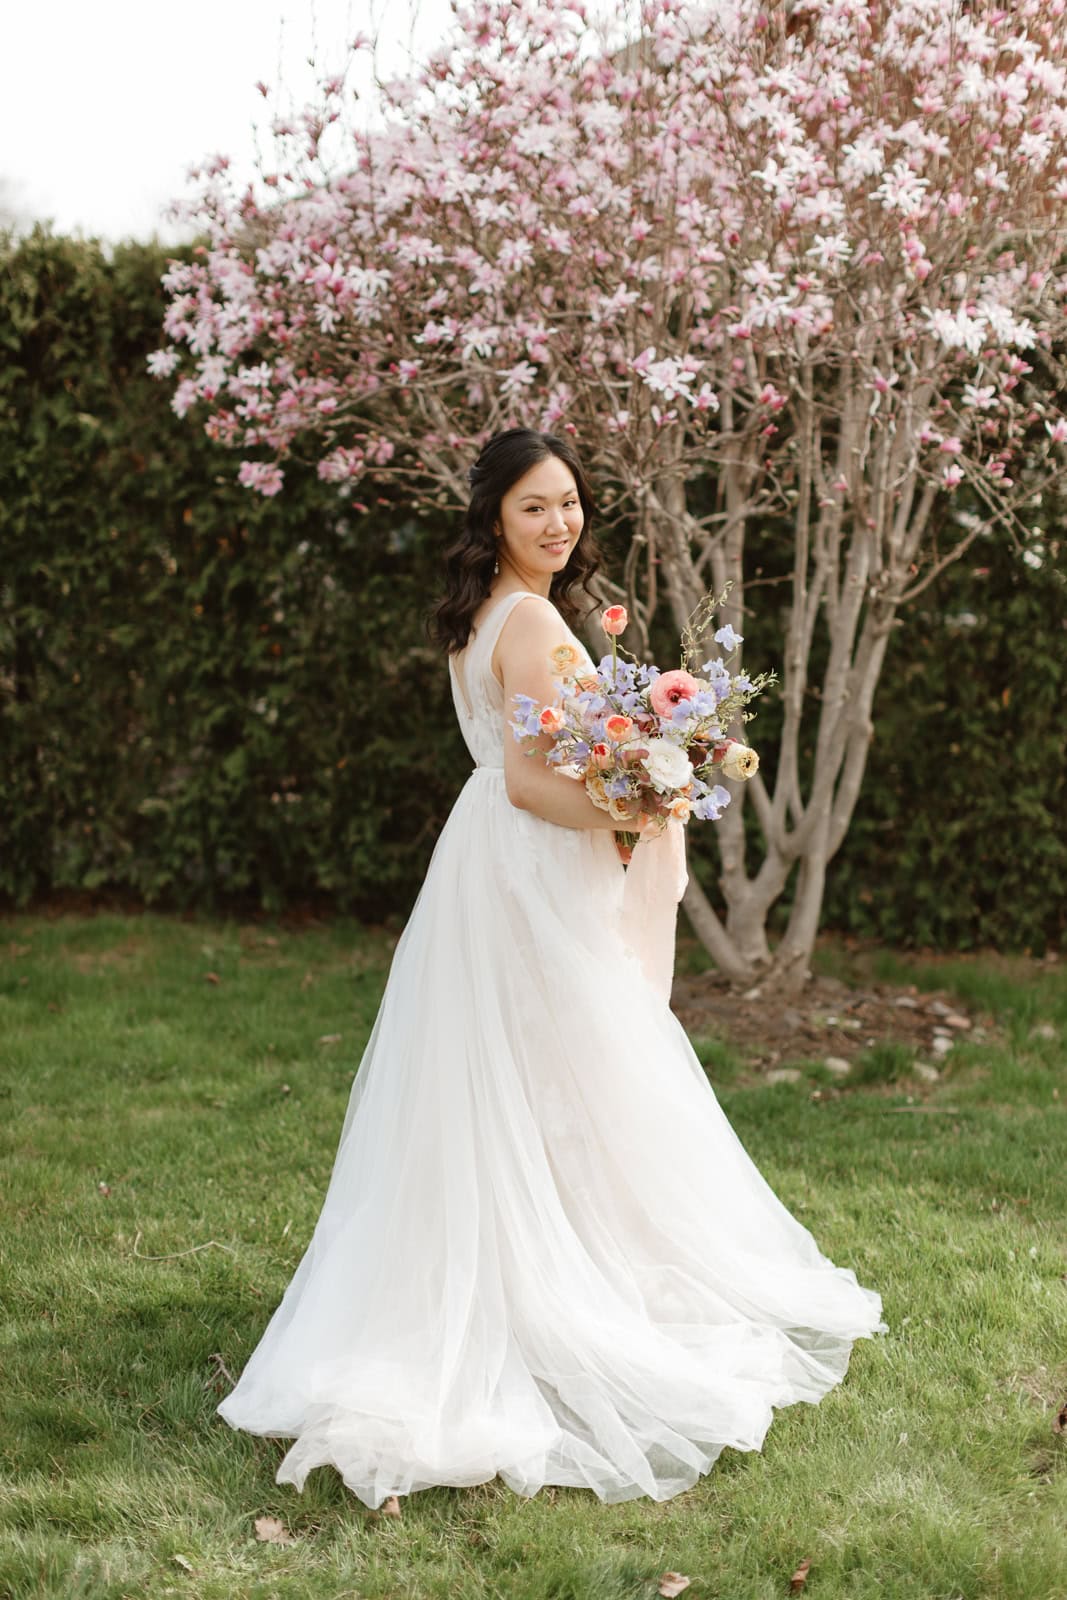 A bride in a flowing white Willoby by Watters wedding gown holds a colorful spring bouquet, smiling in a garden with a blooming pink magnolia tree.